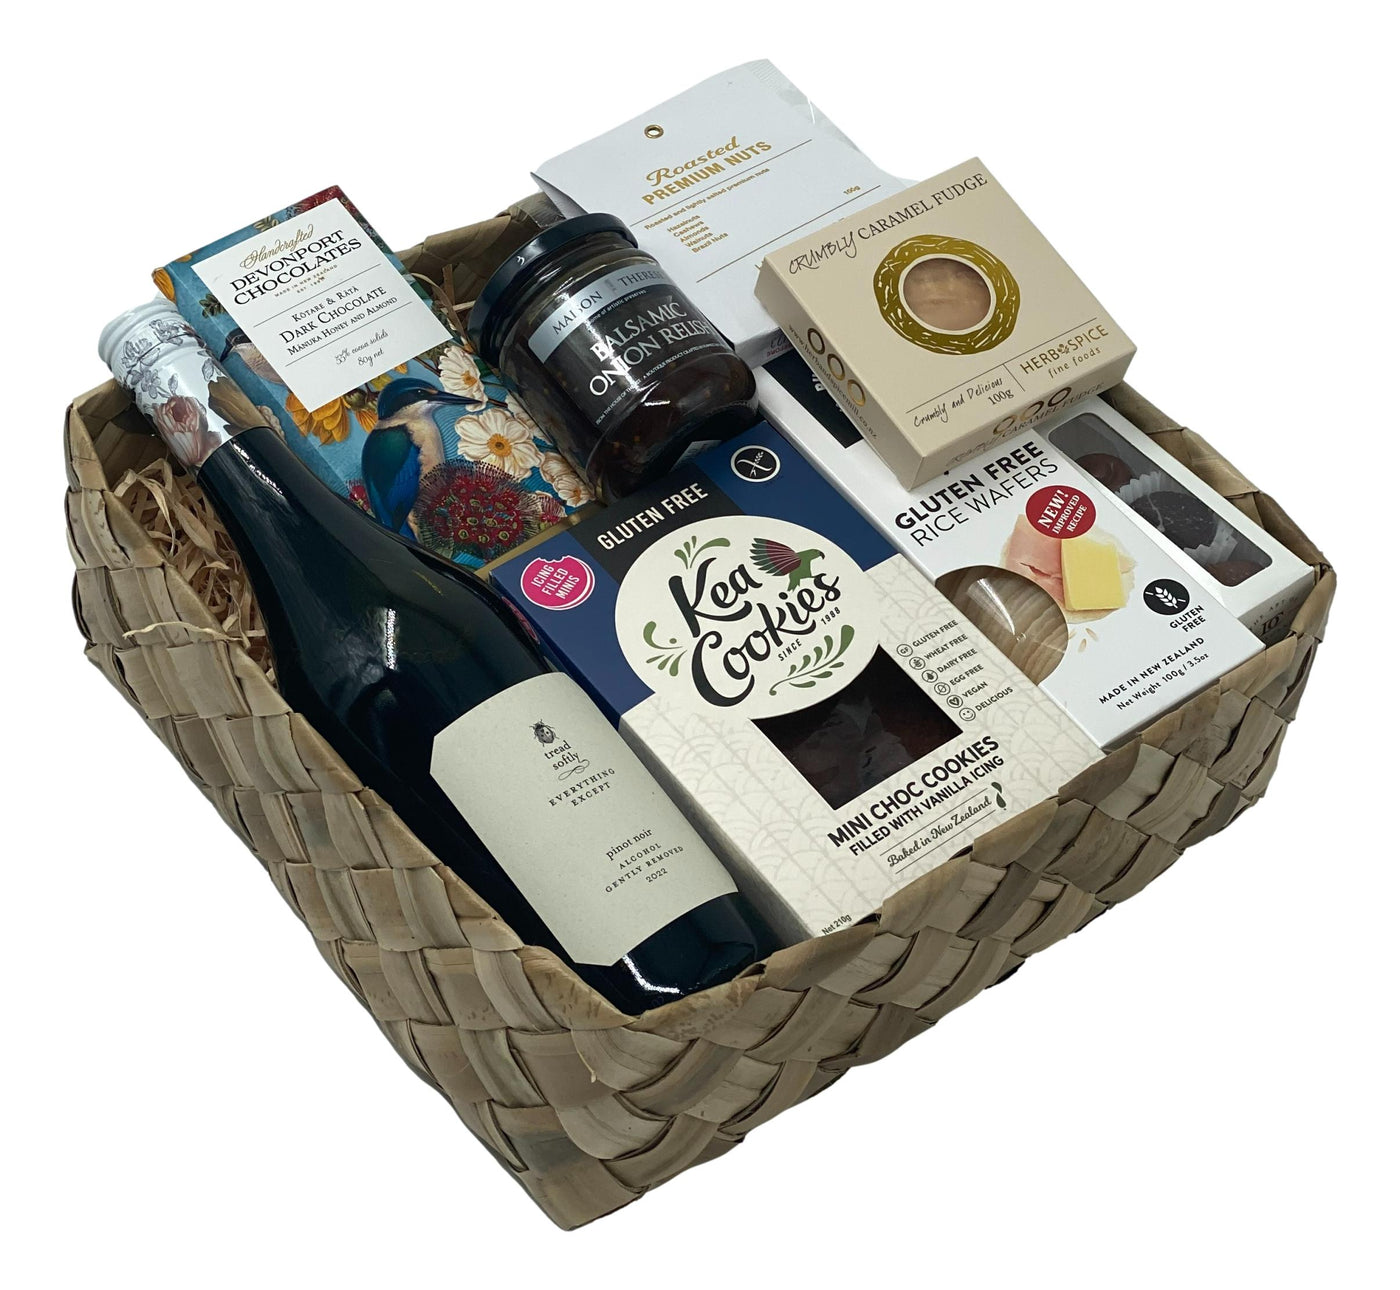 Gluten free gift hampers and gift boxes NZ